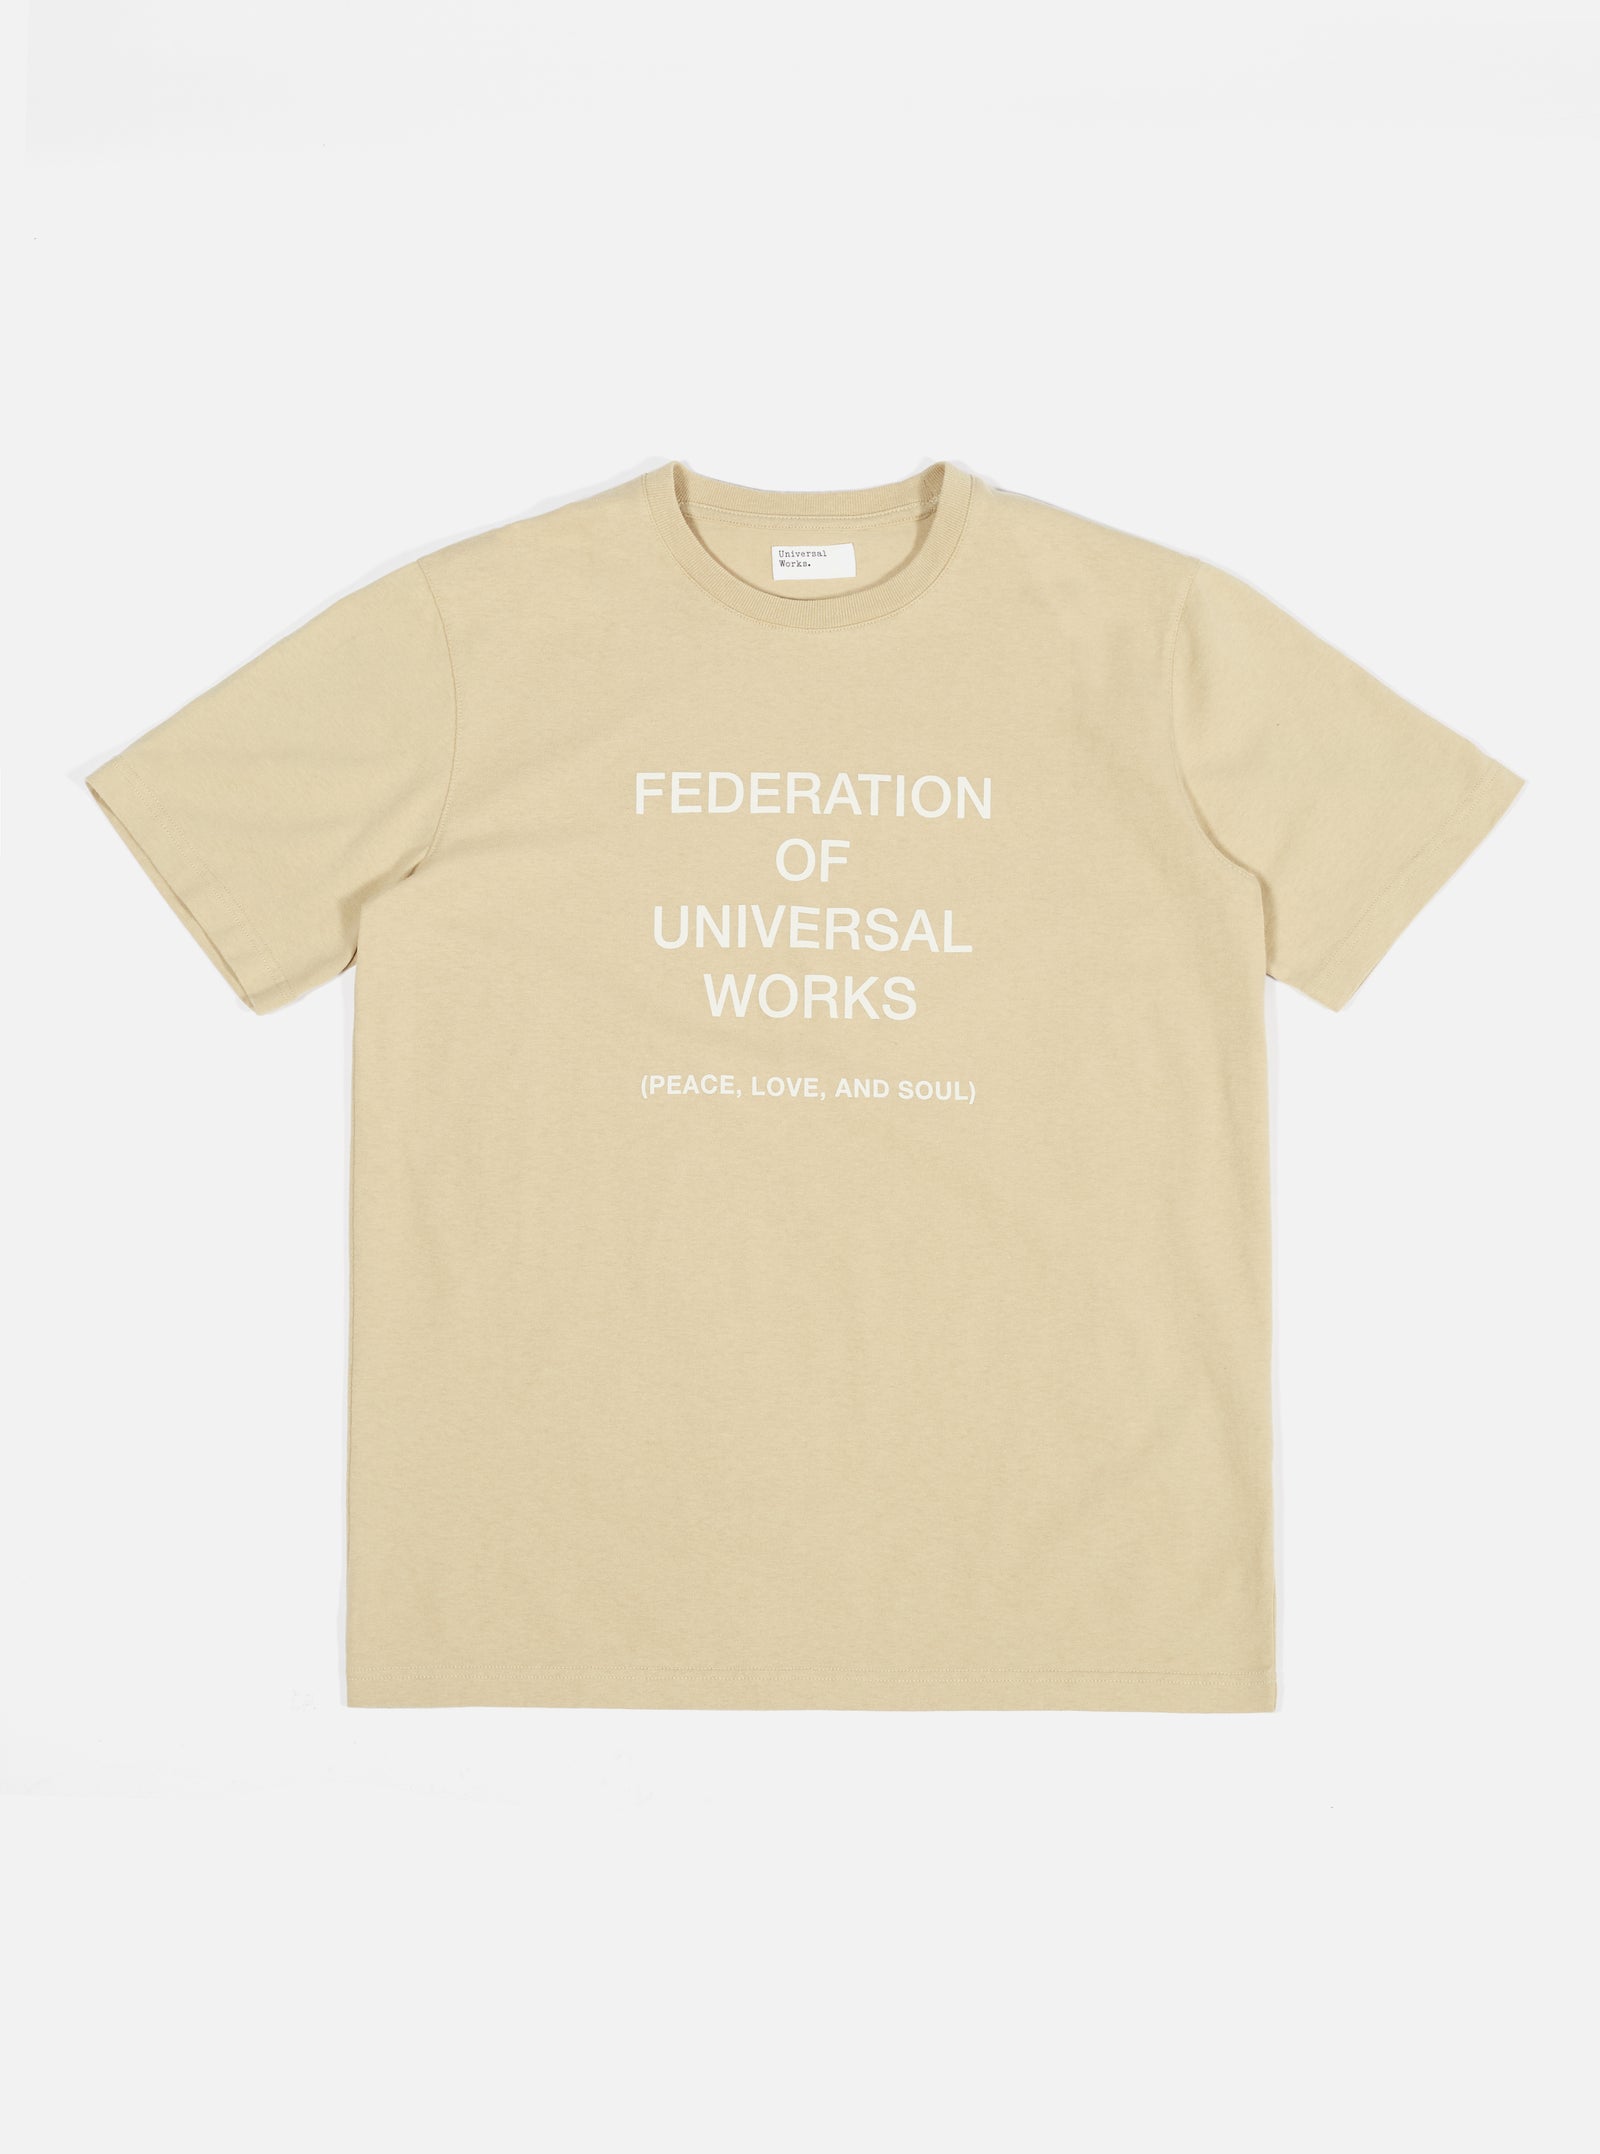 Universal Works Federation Tee in Stone Organic Jersey